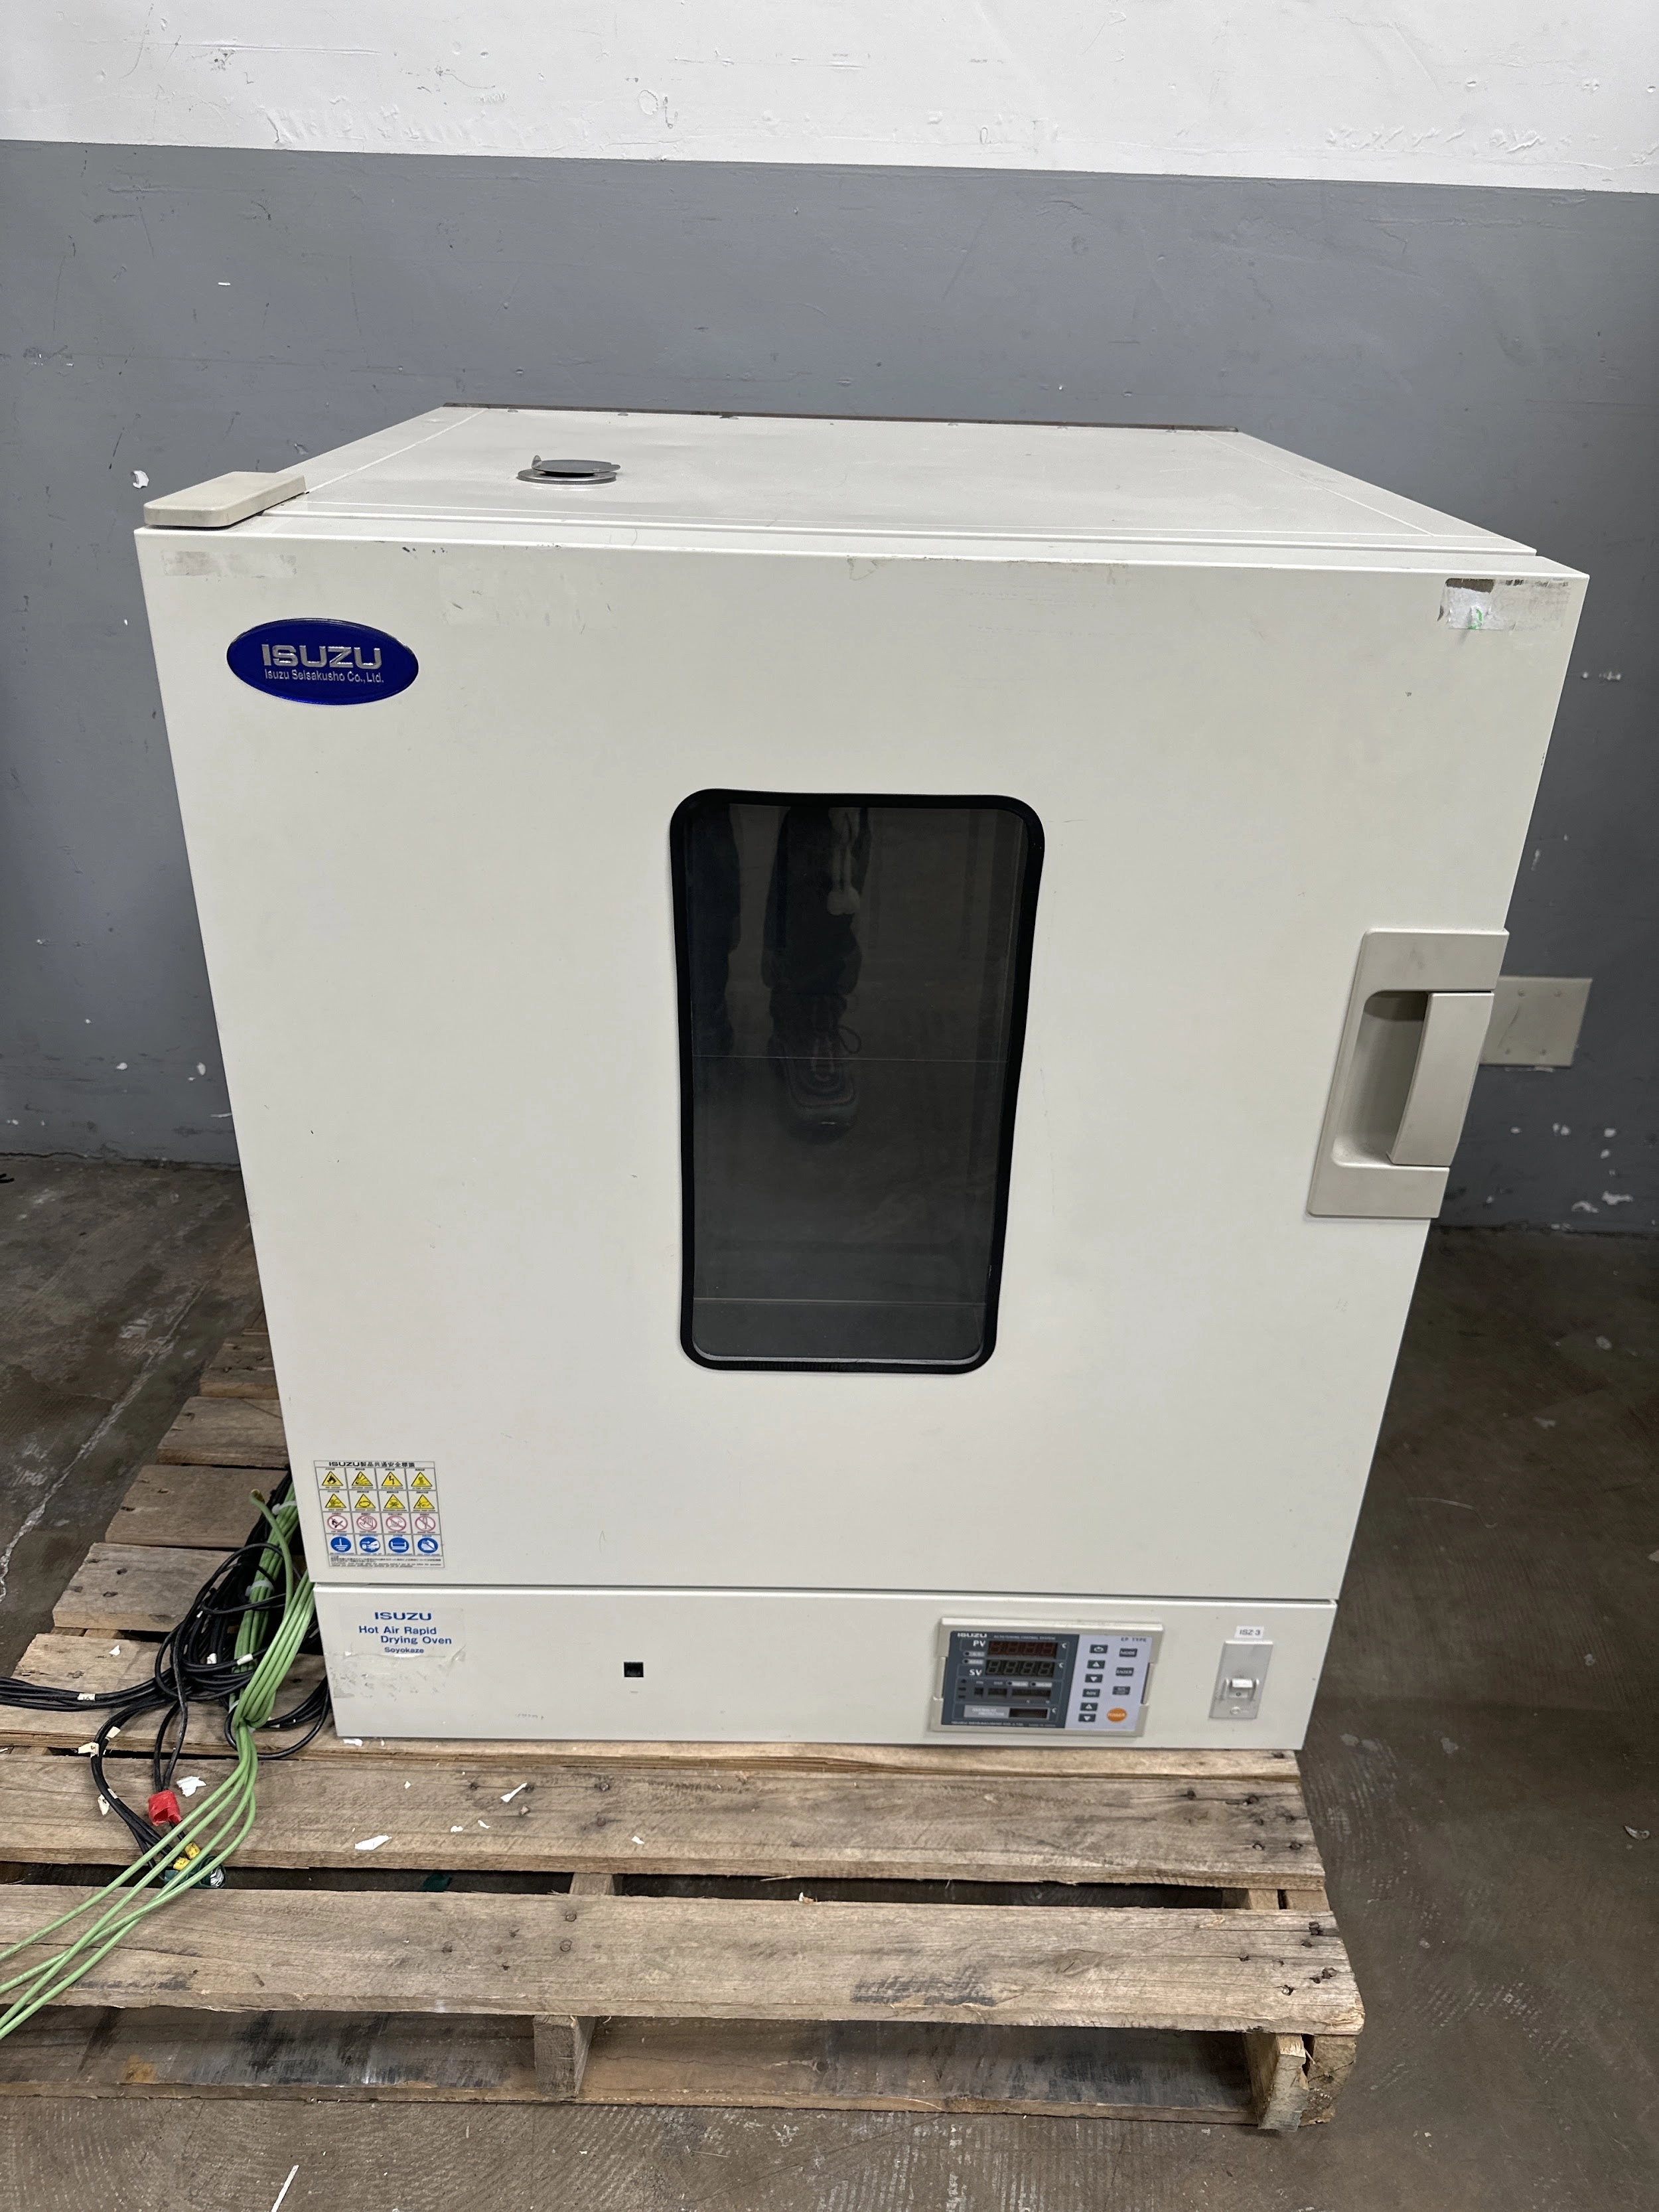 Isuzu EPR-115 Hot Air Rapid Drying Oven With Various Adapters - Fair Condition